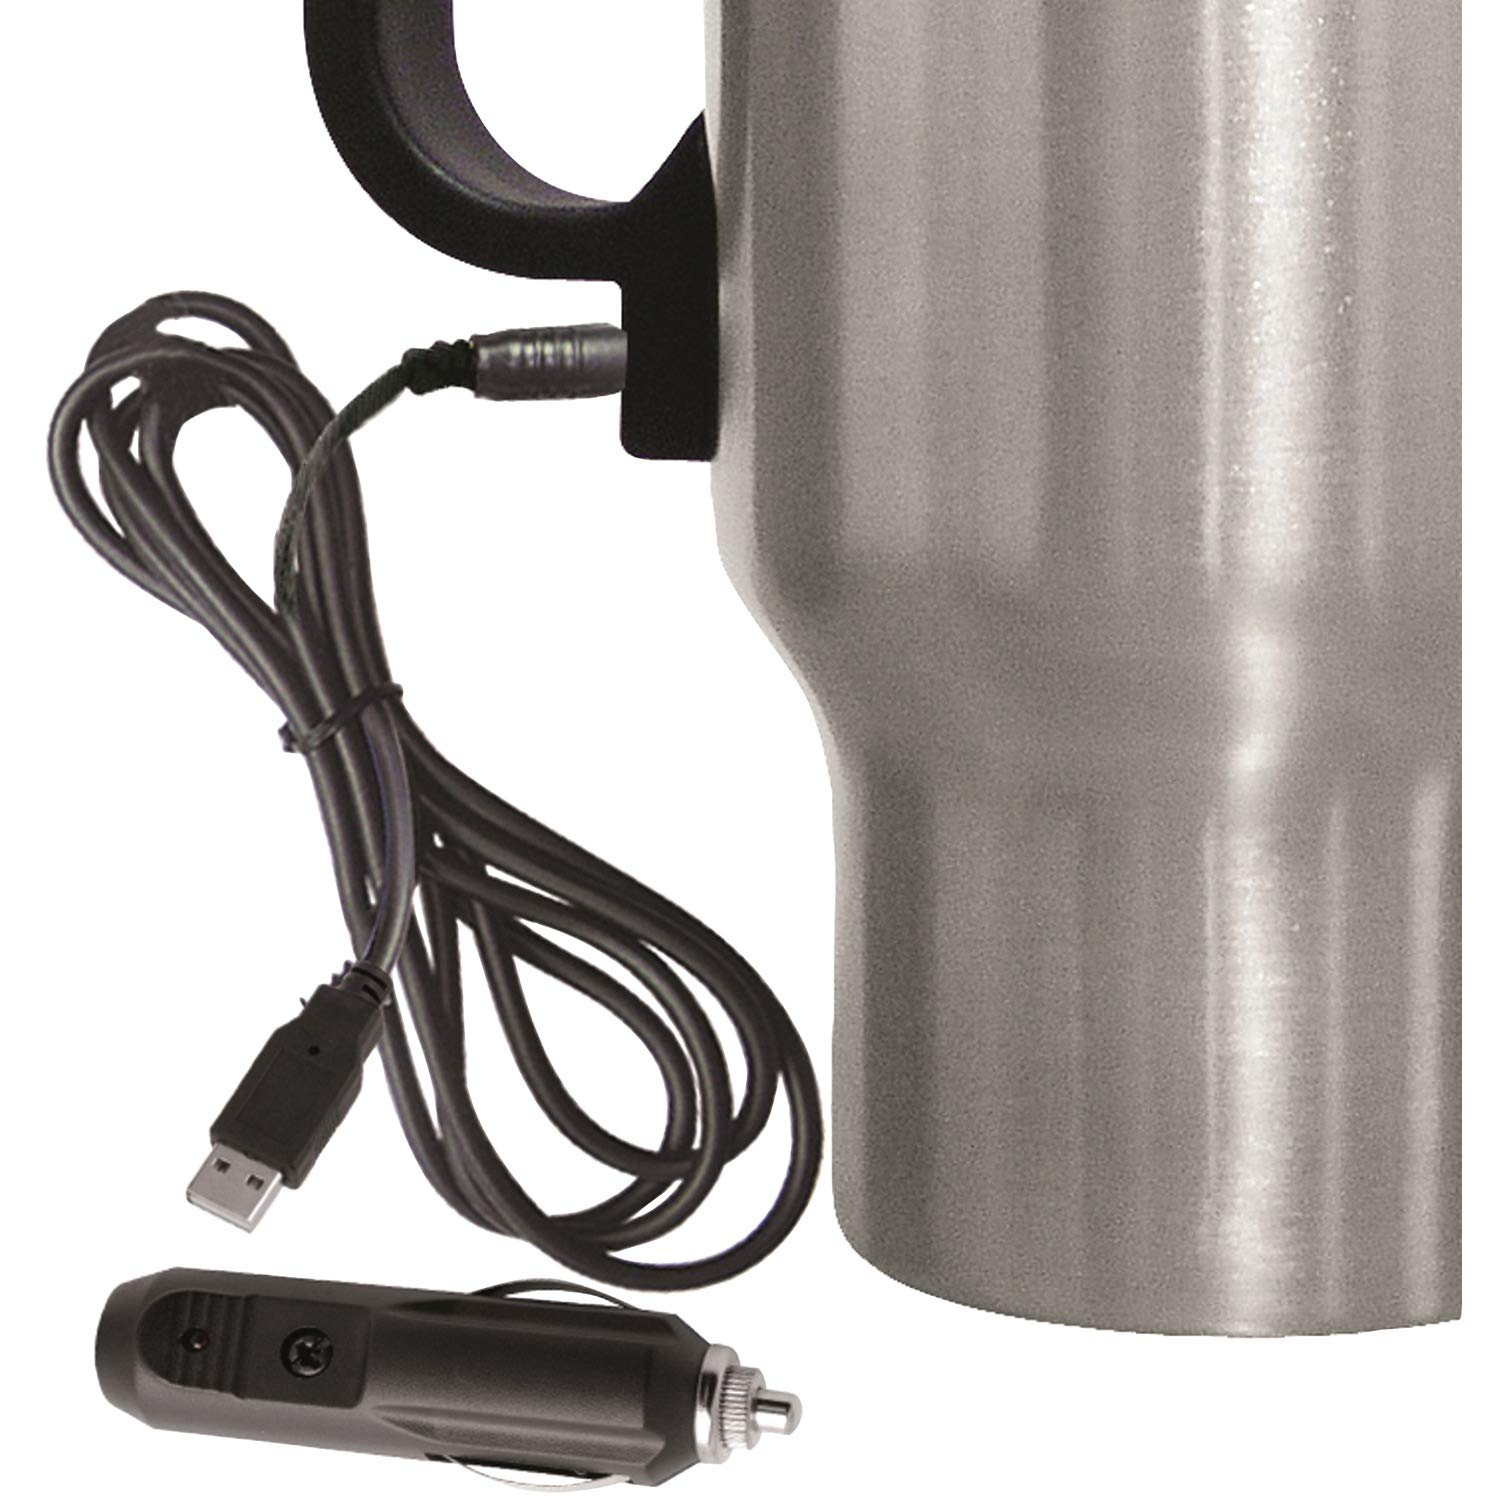 Brentwood Travel Mug 12 Volt Heated, 1 Count (Pack of 1), Stainless Steel